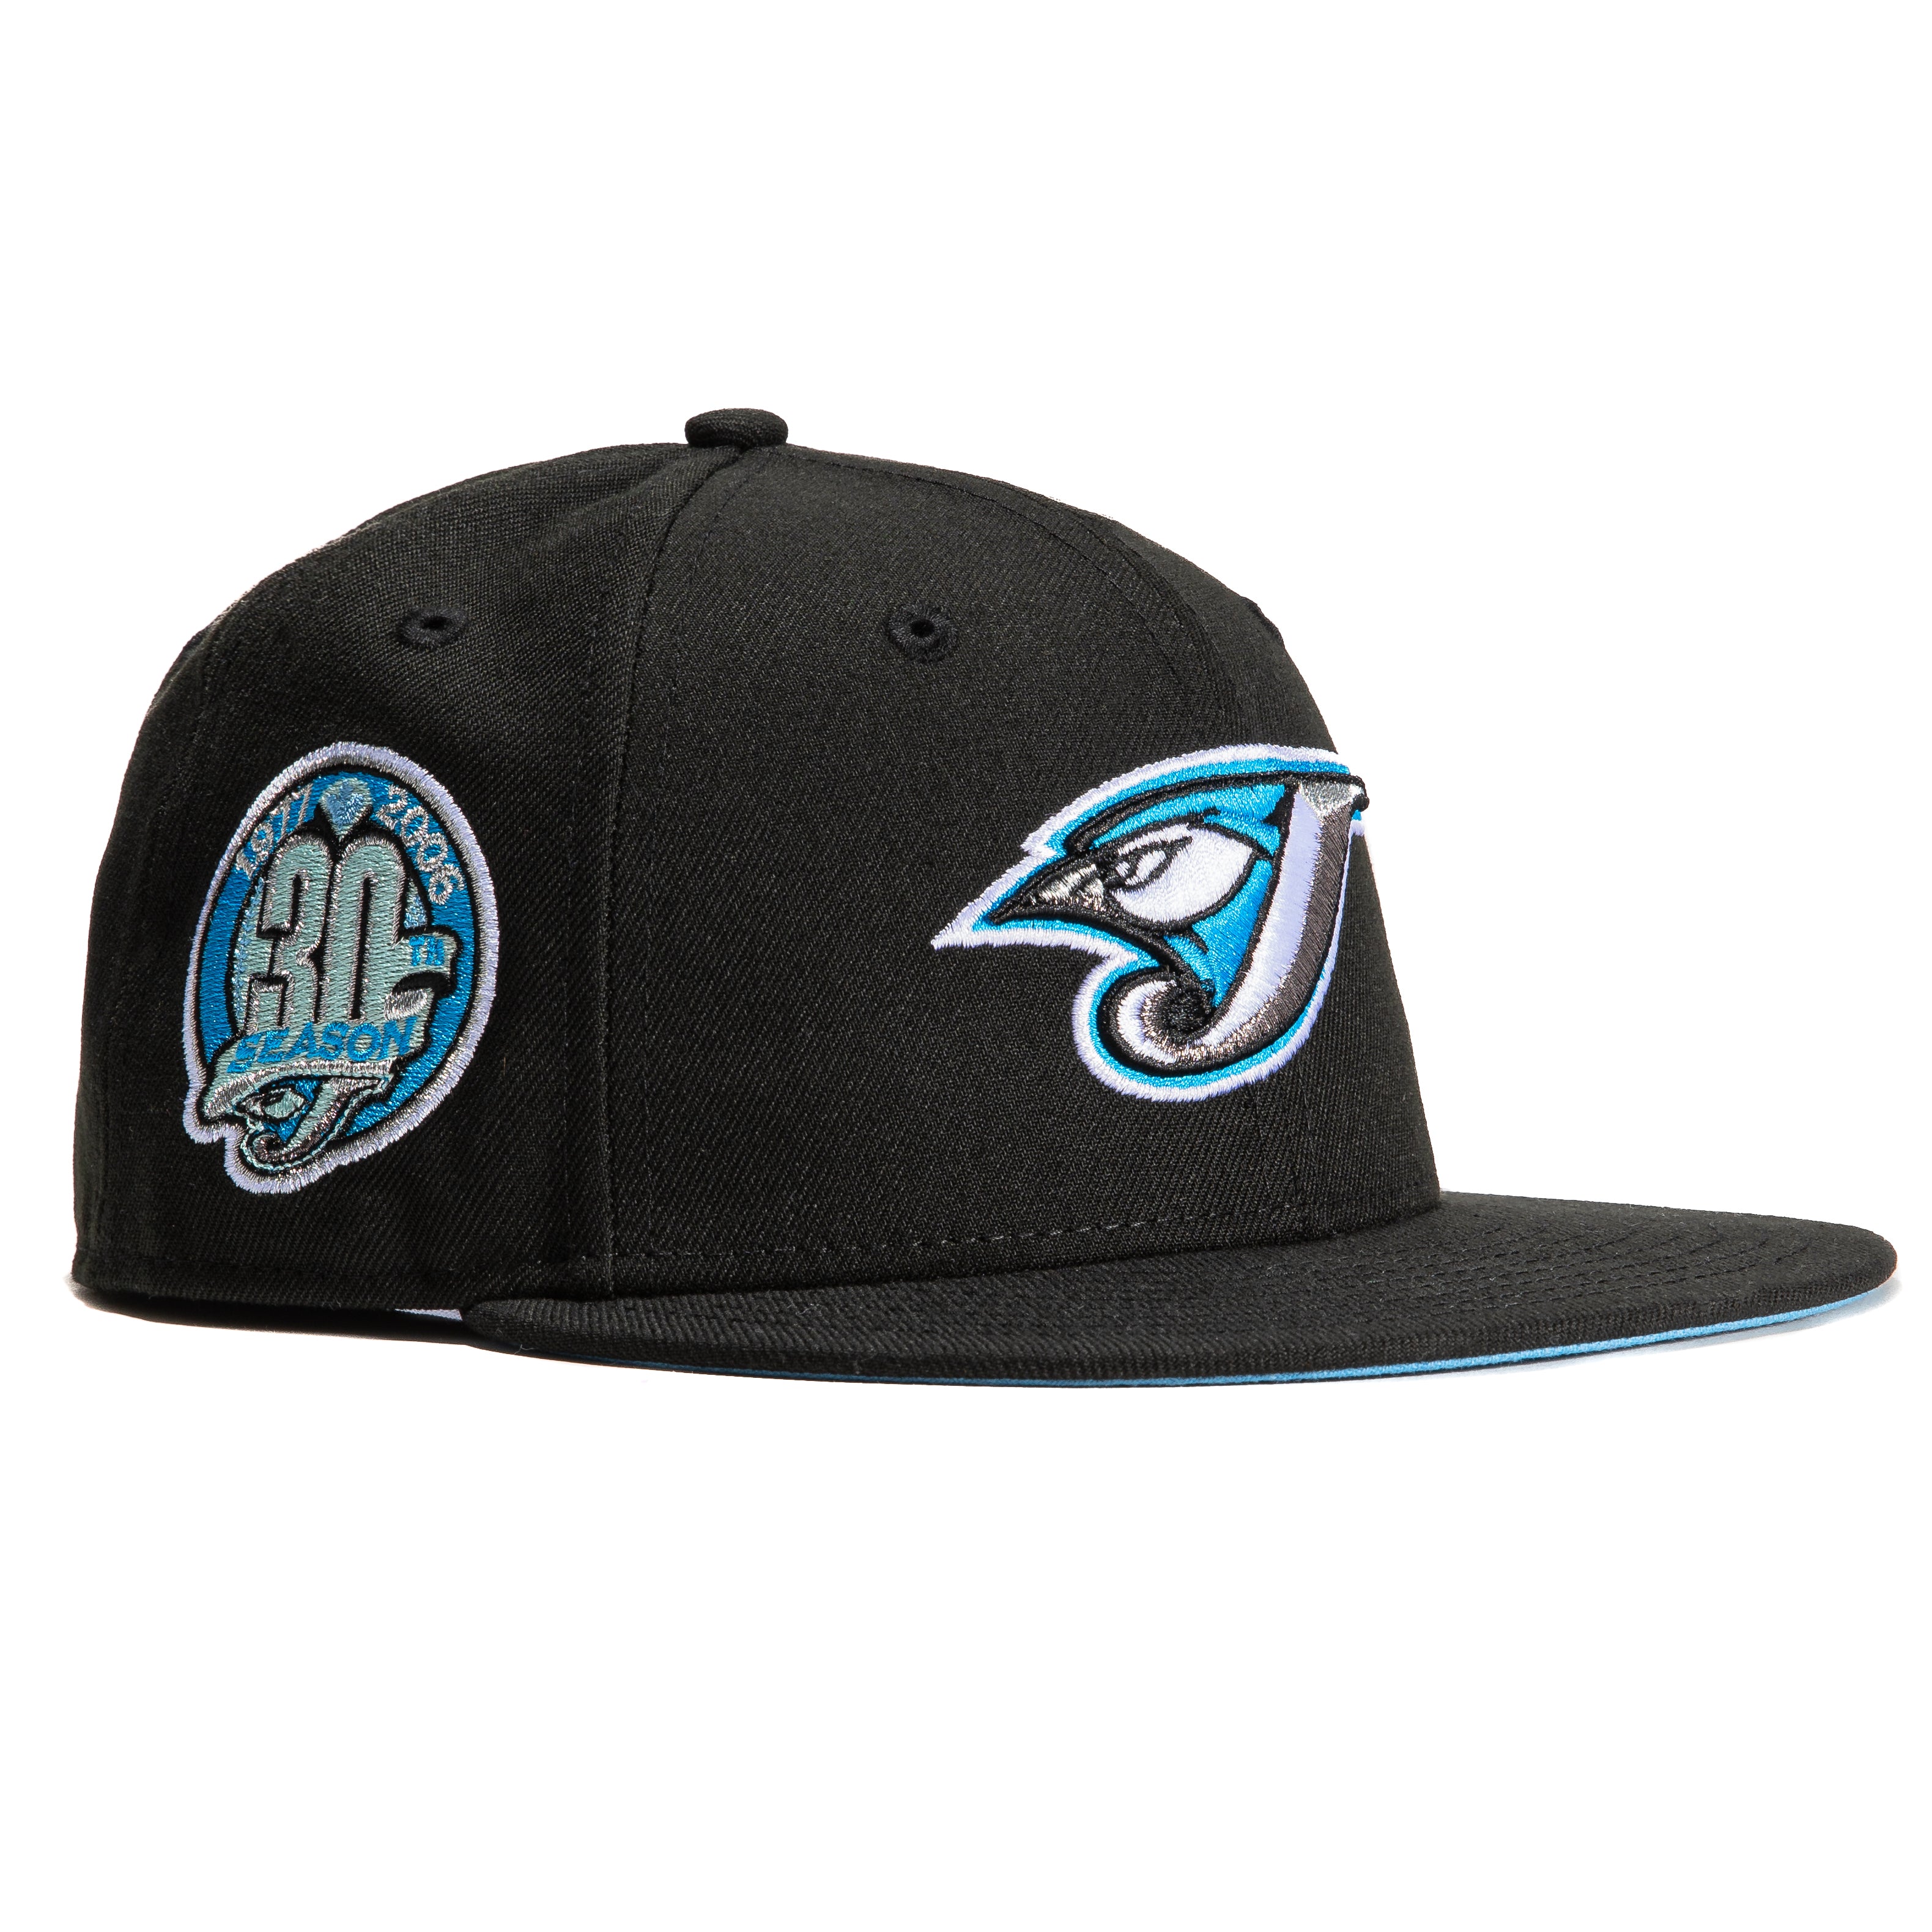 NEW ERA 59FIFTY TORONTO BLUE JAYS BLACK/GOLD FITTED HAT